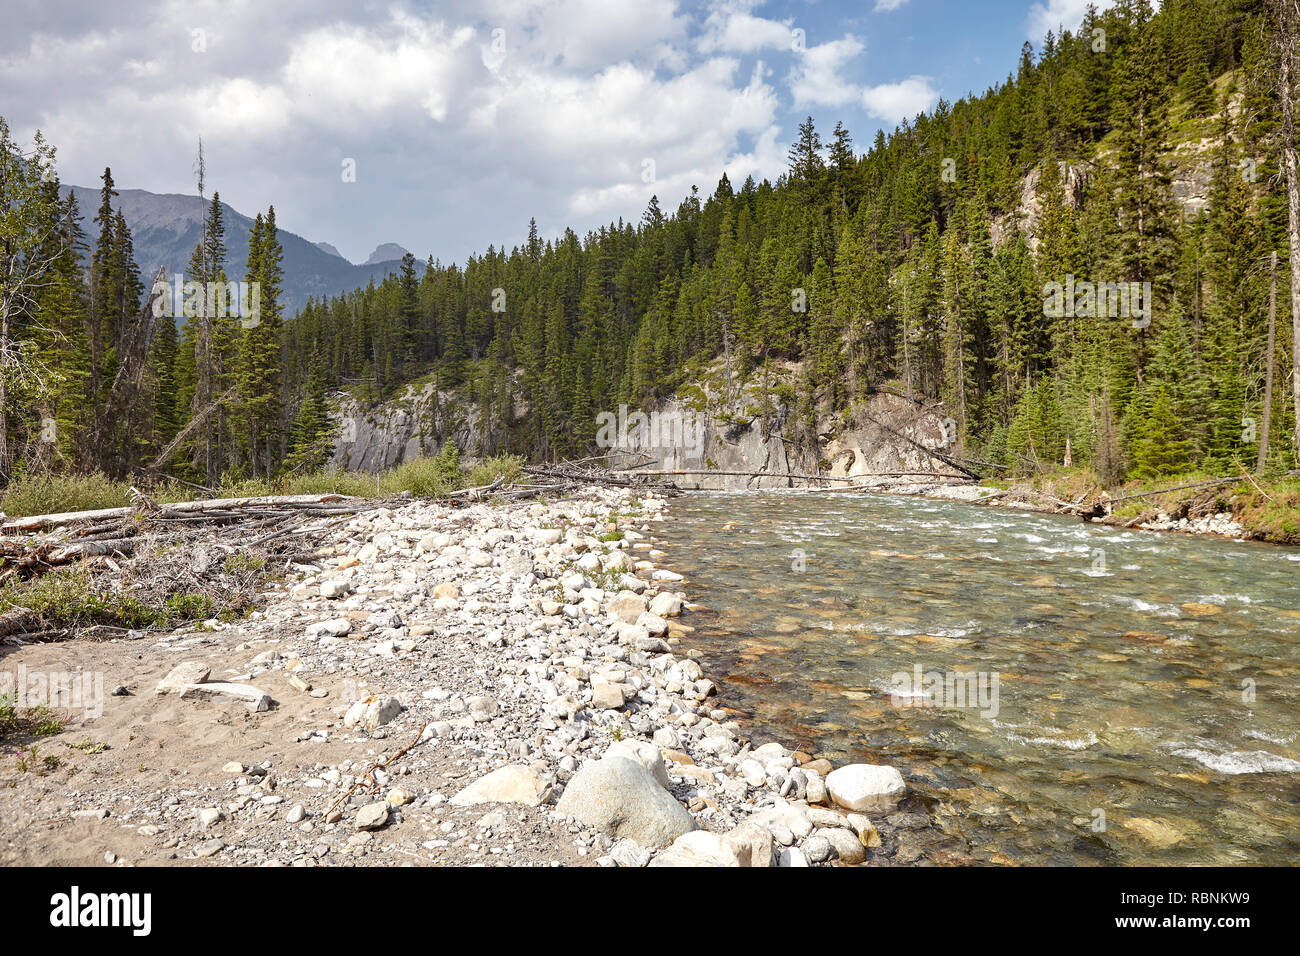 River Running Through Wooded Valley Between Mountains In Alaska Stock Photo